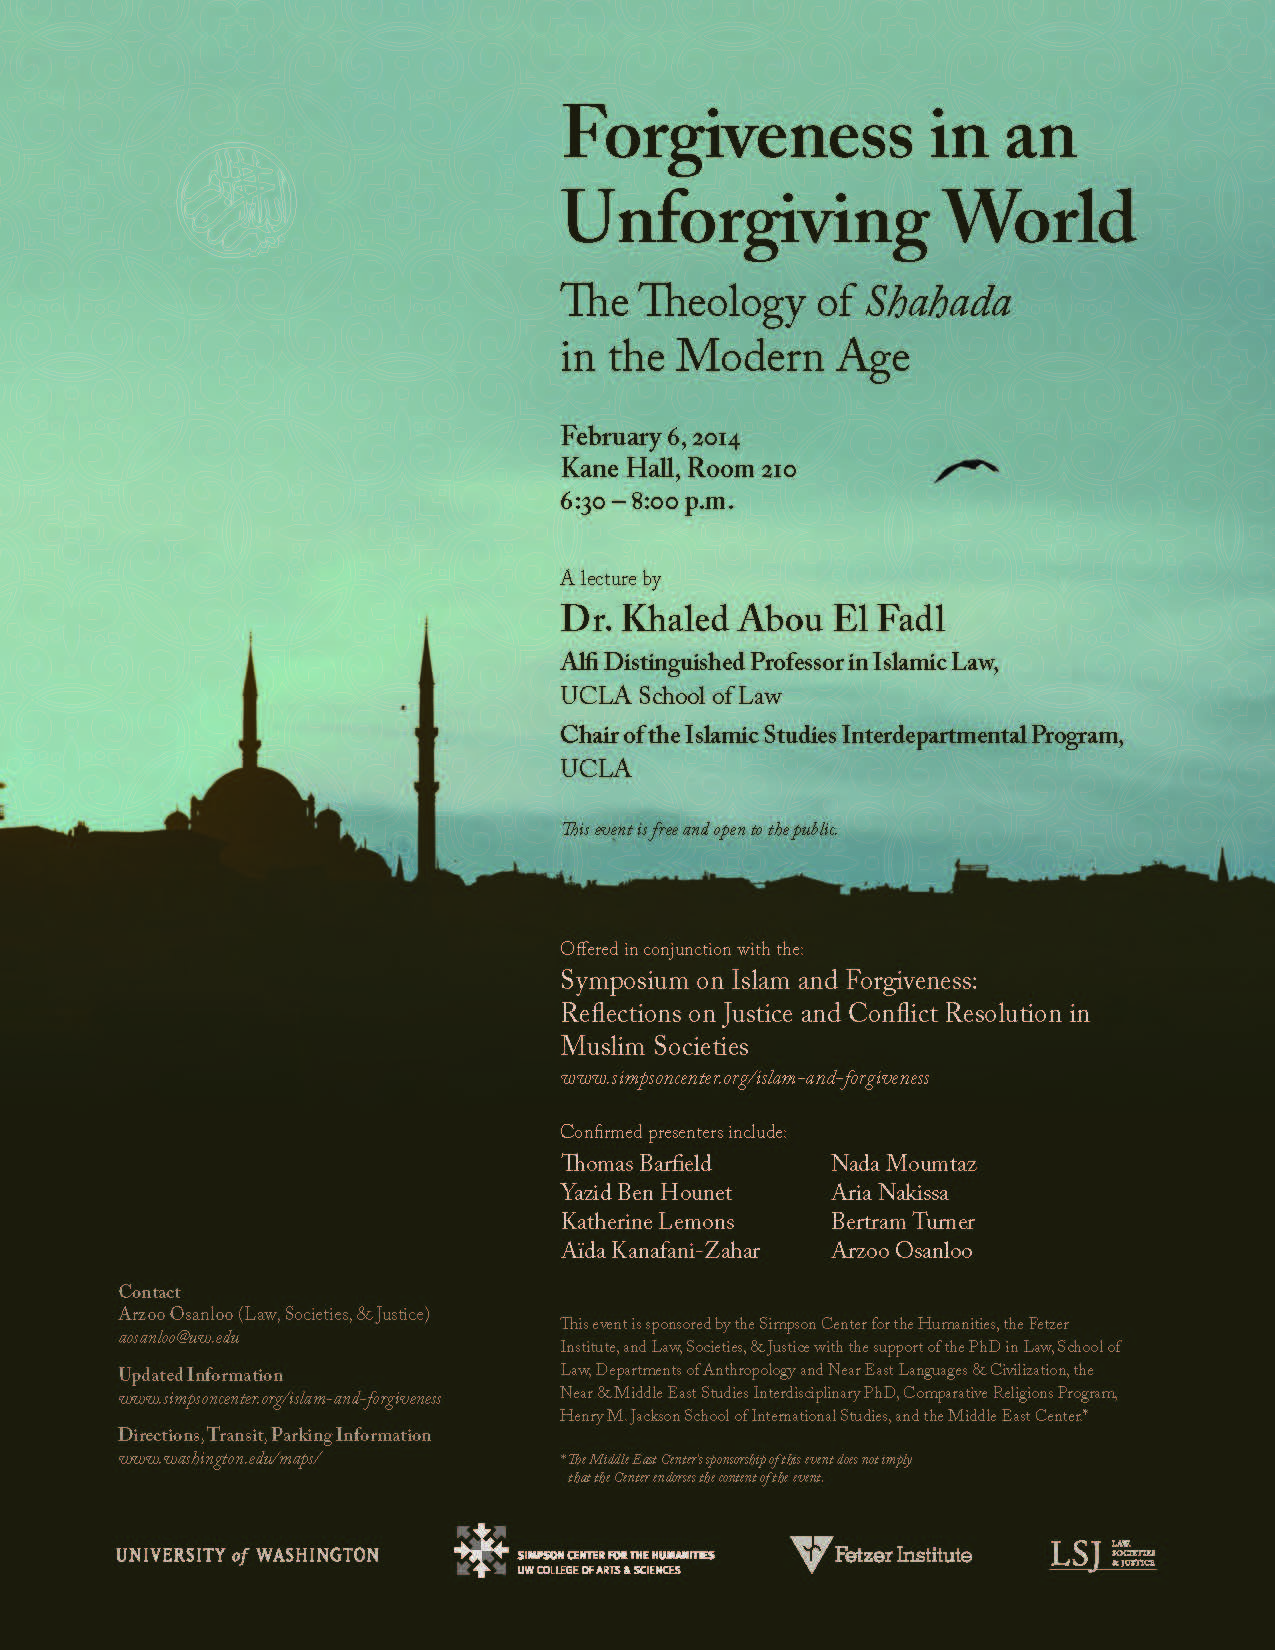 Flyer for Forgiveness in an Unforgiving World: The Theology of Shahada, presented on February 6, 2014